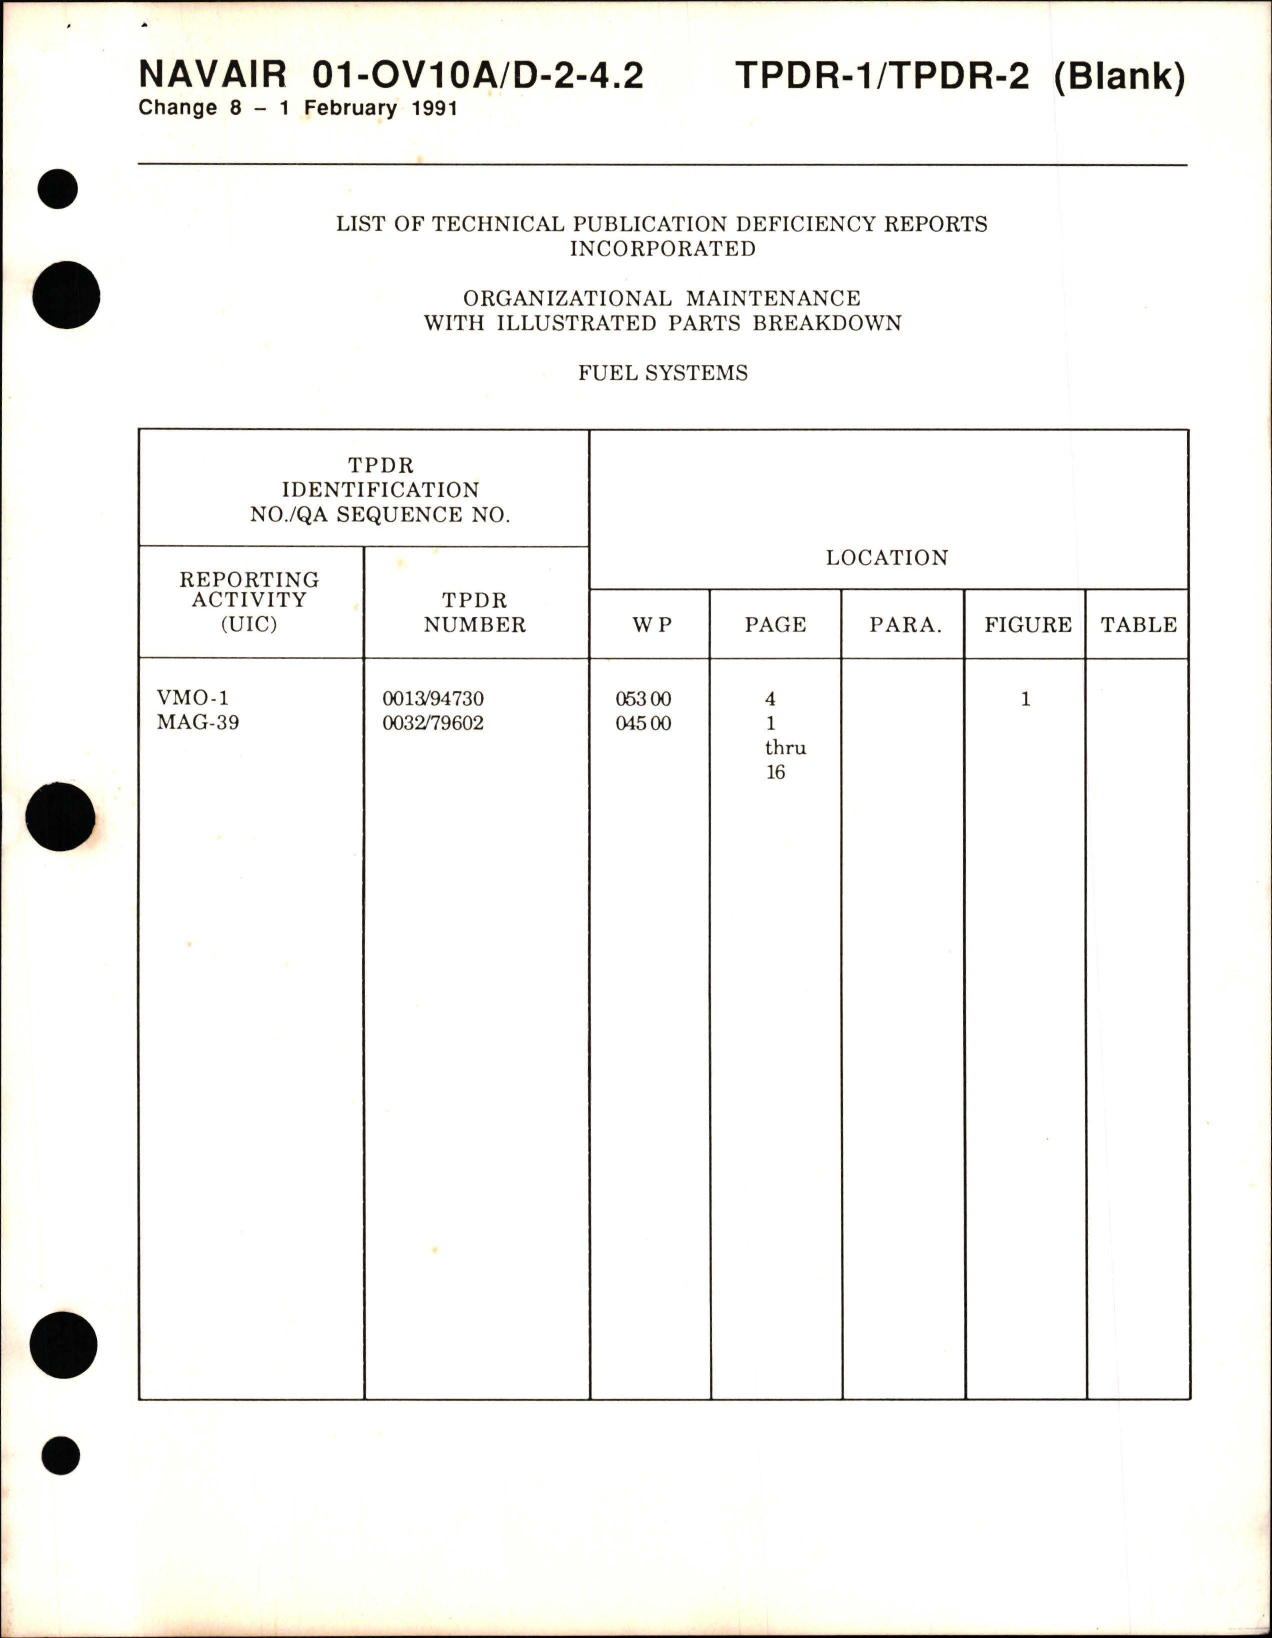 Sample page 7 from AirCorps Library document: Organizational Maintenance with Illustrated Parts Breakdown for Fuel Systems on OV-10A and OV-10D 